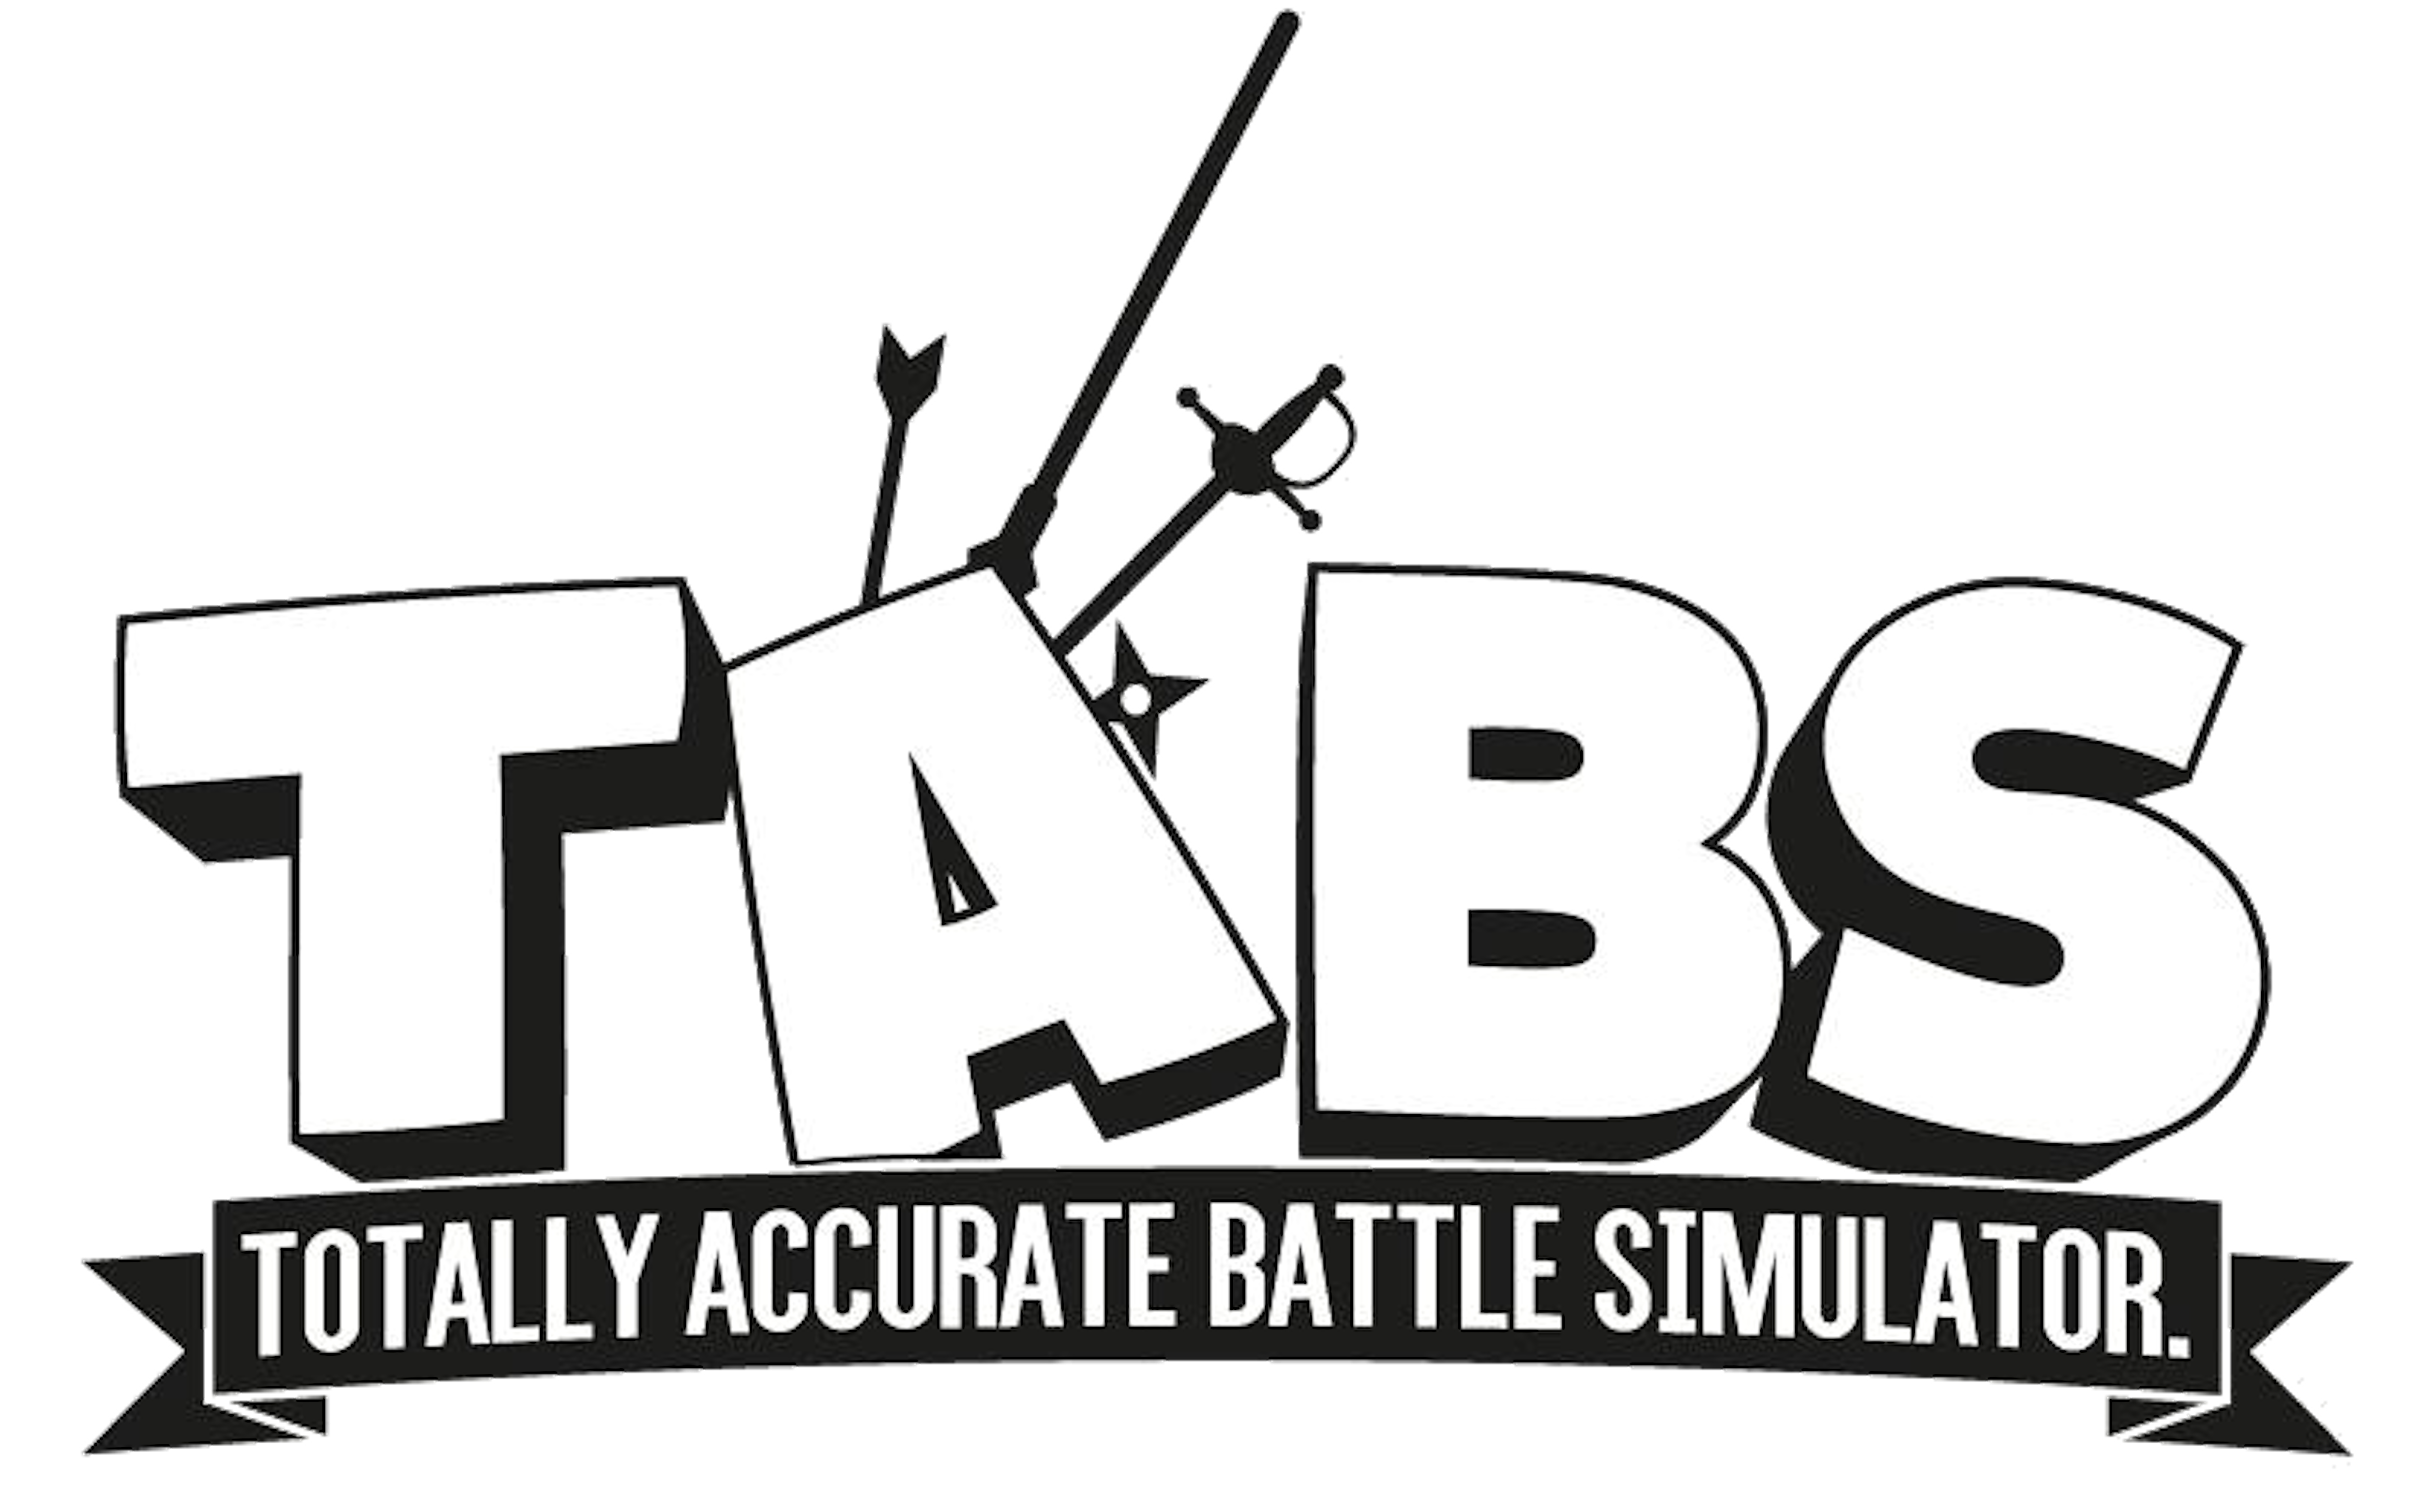 when does totally accurate battle simulator release date